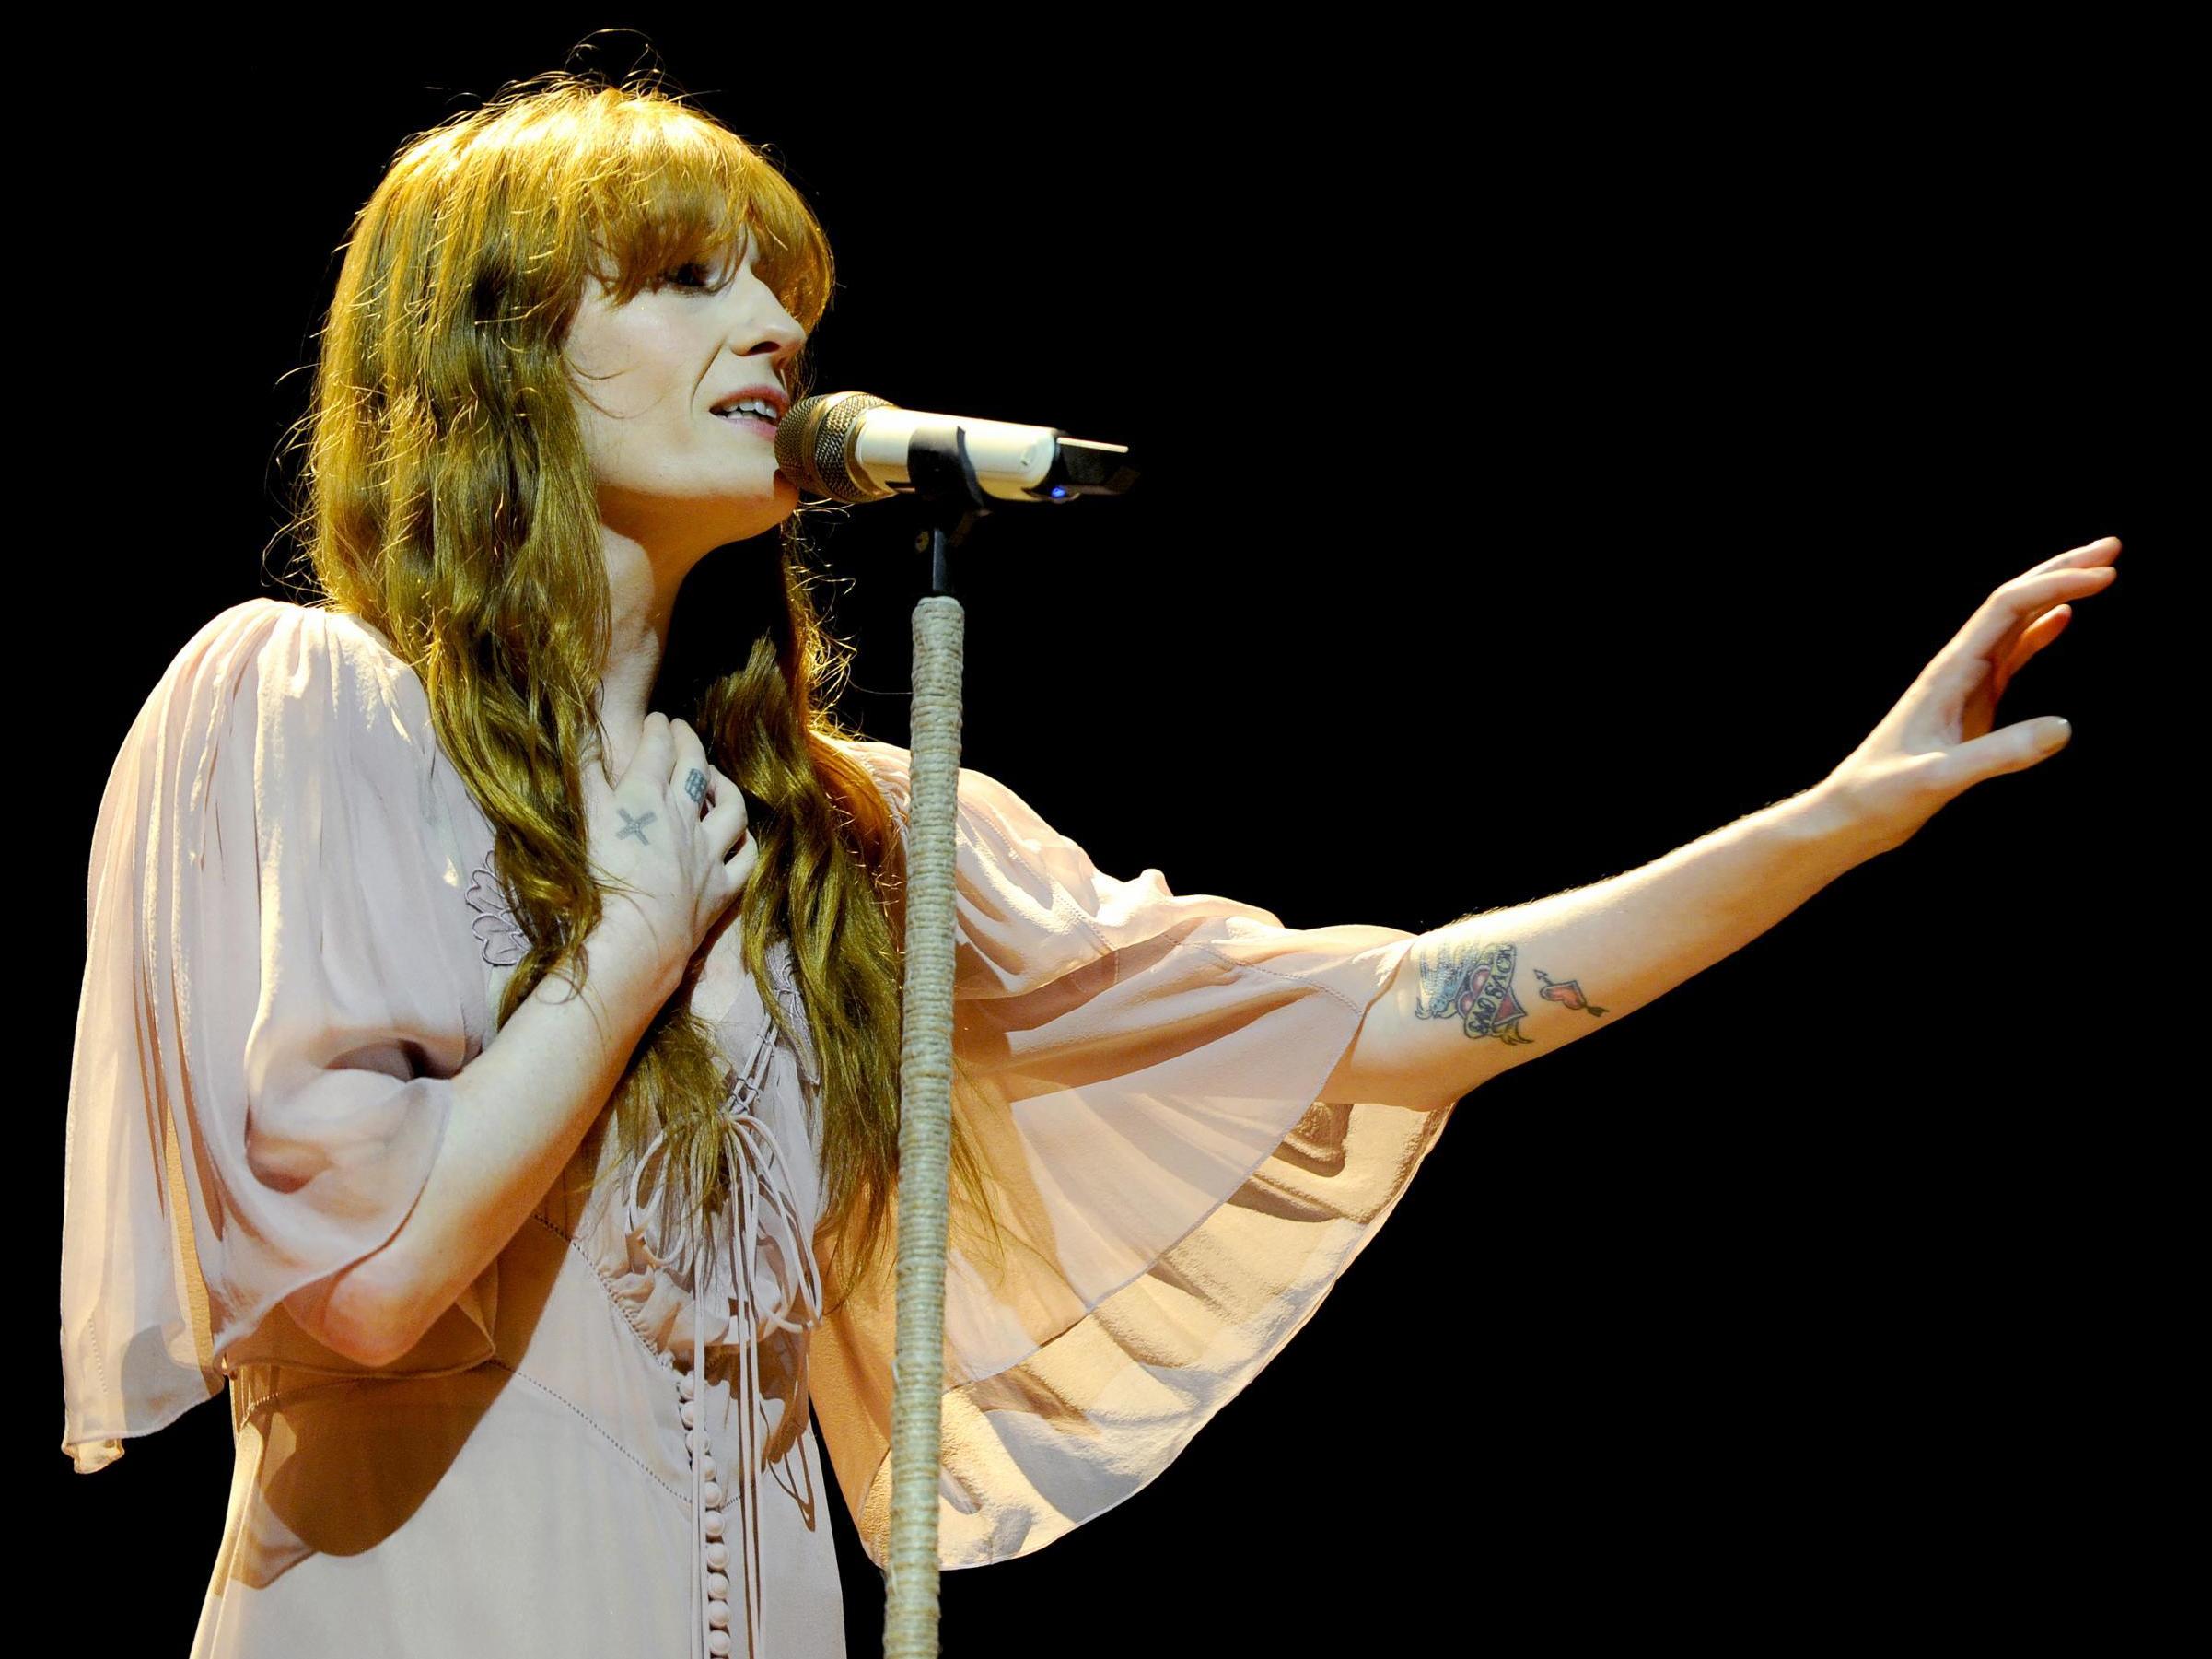 Florence Welch of Florence and the Machine performs at Manchester Arena on November 23, 2018 in Manchester, England